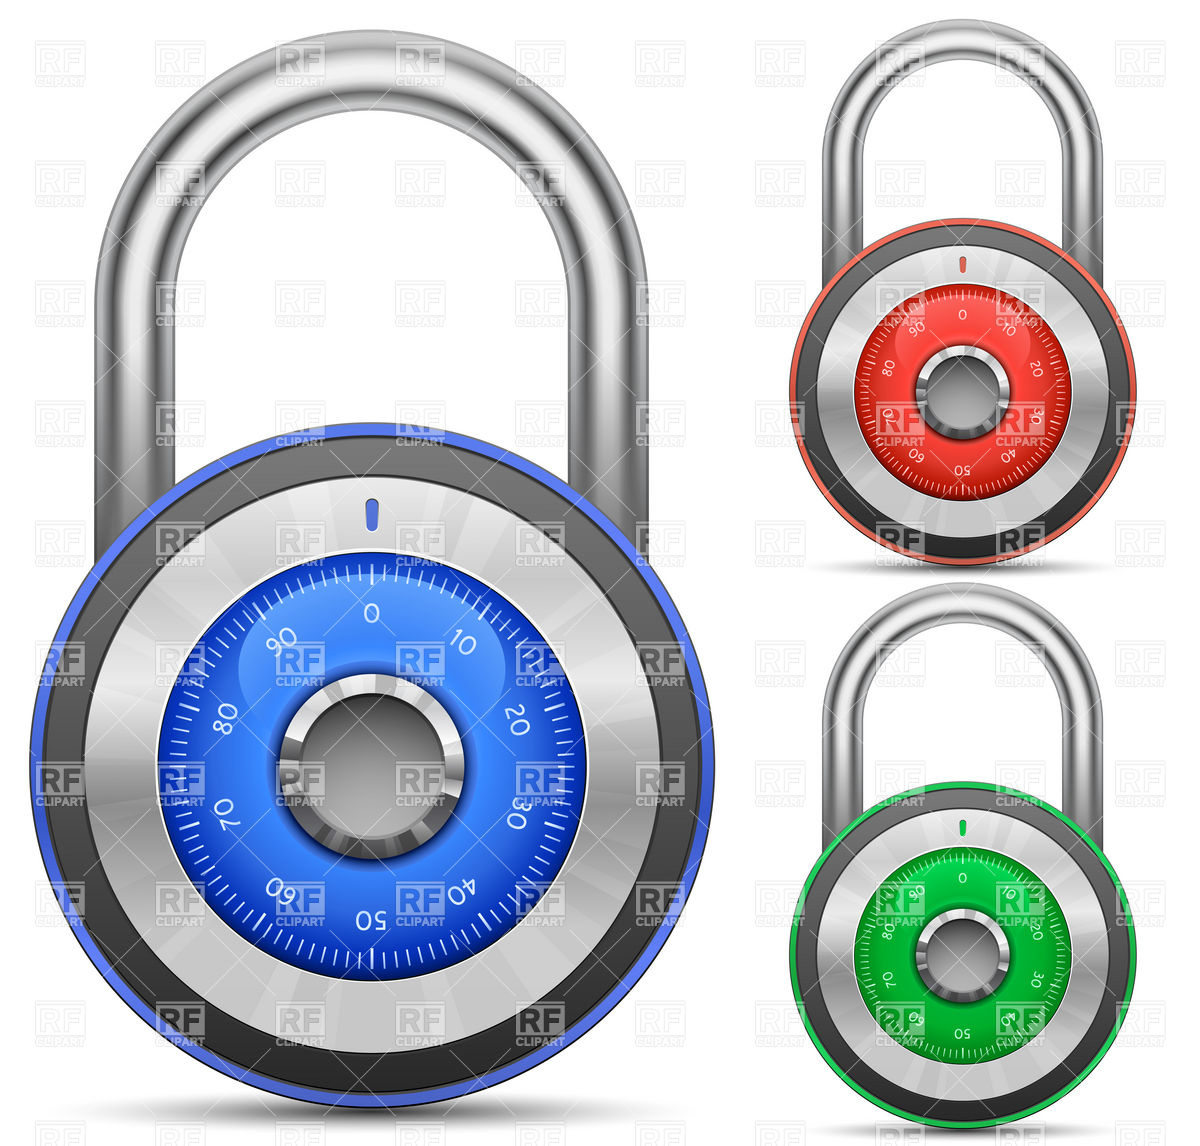     Lock   Security Concept Download Royalty Free Vector Clipart  Eps